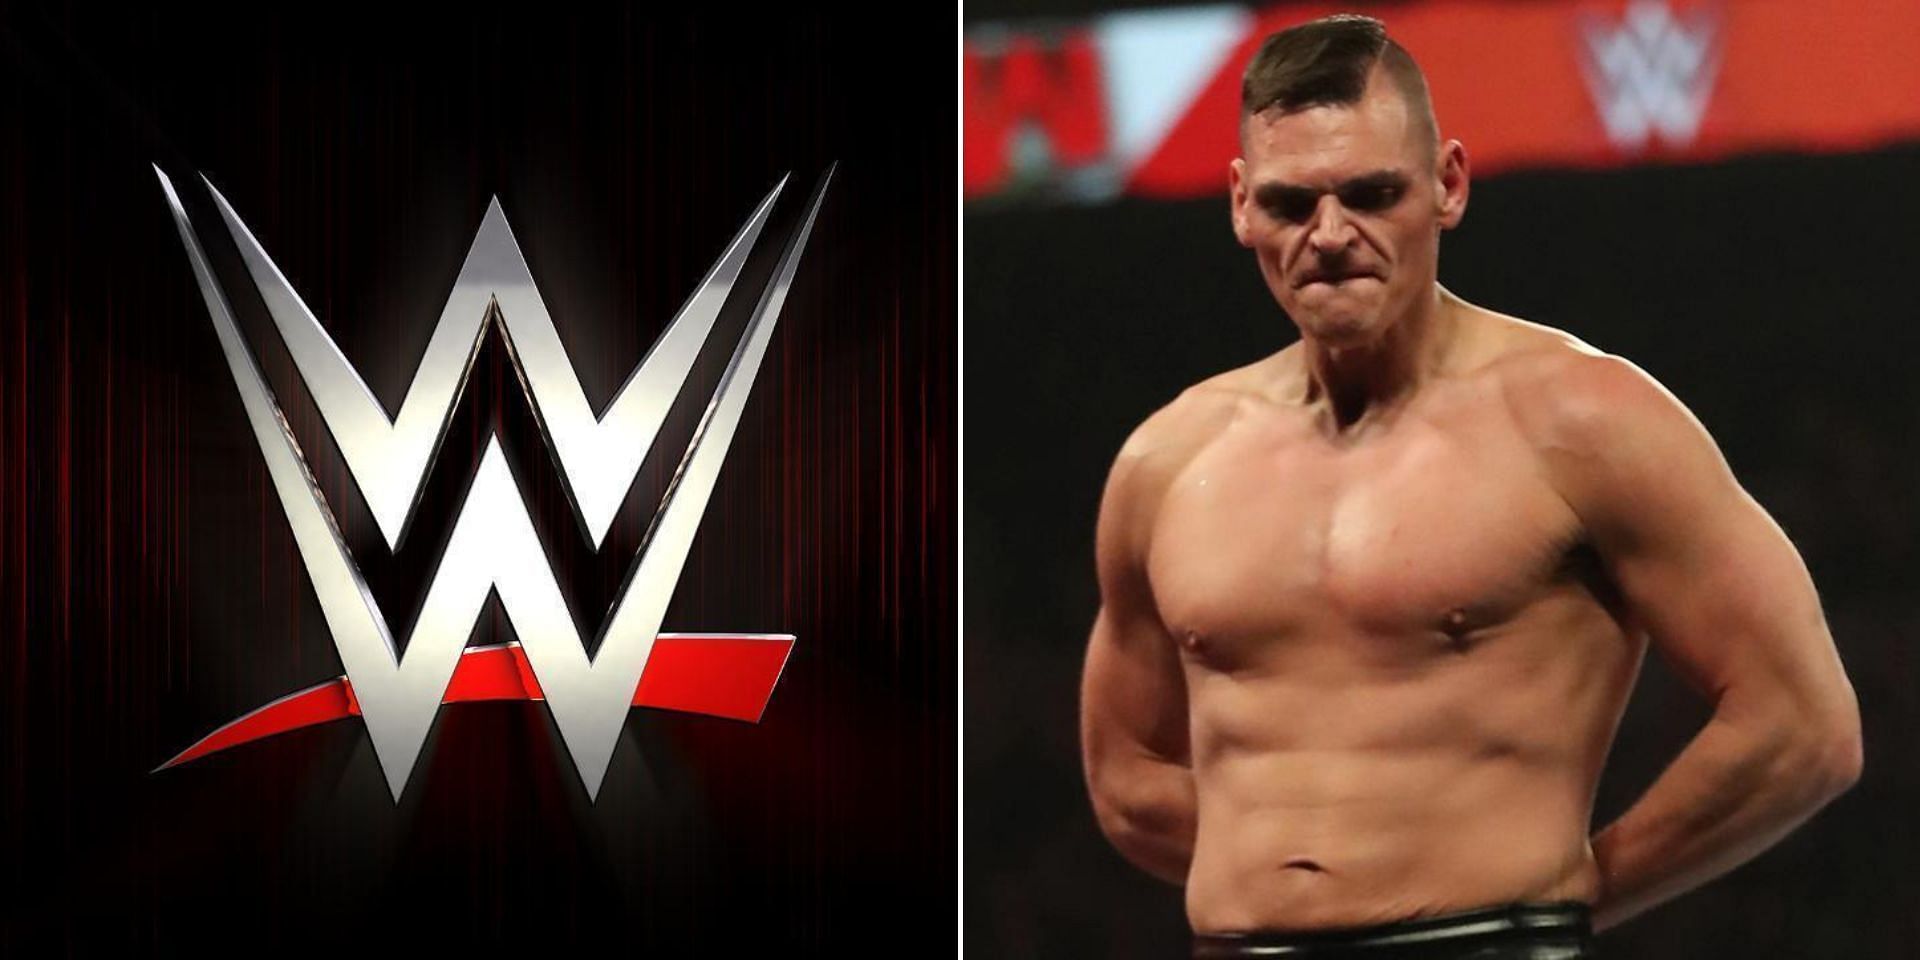 A RAW Superstar will compete in a title match